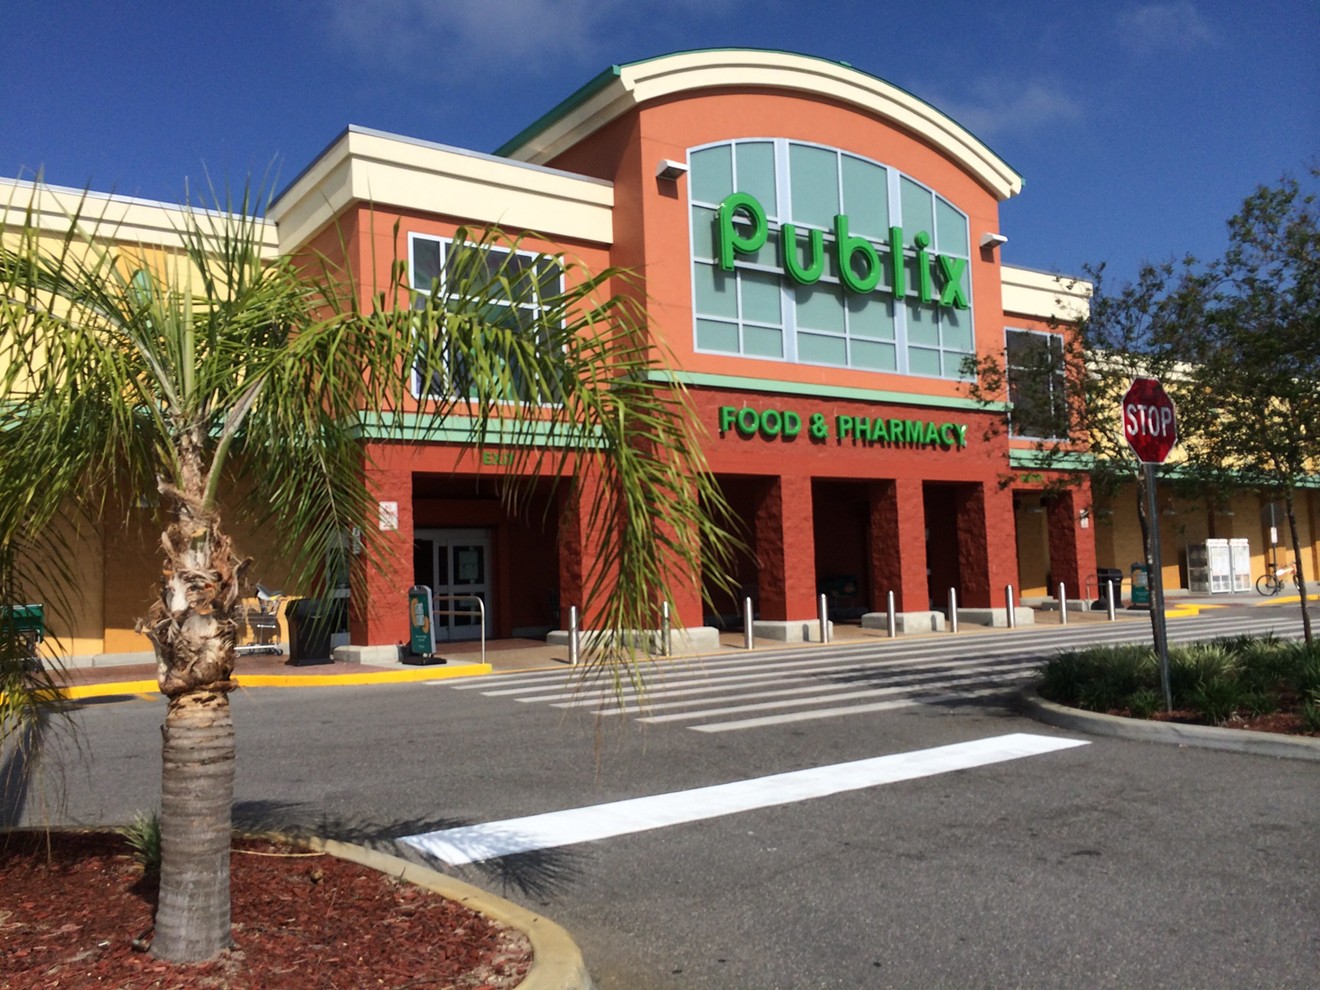 Need something Christmasy from Publix? Get there before 7 p.m. on Christmas Eve.